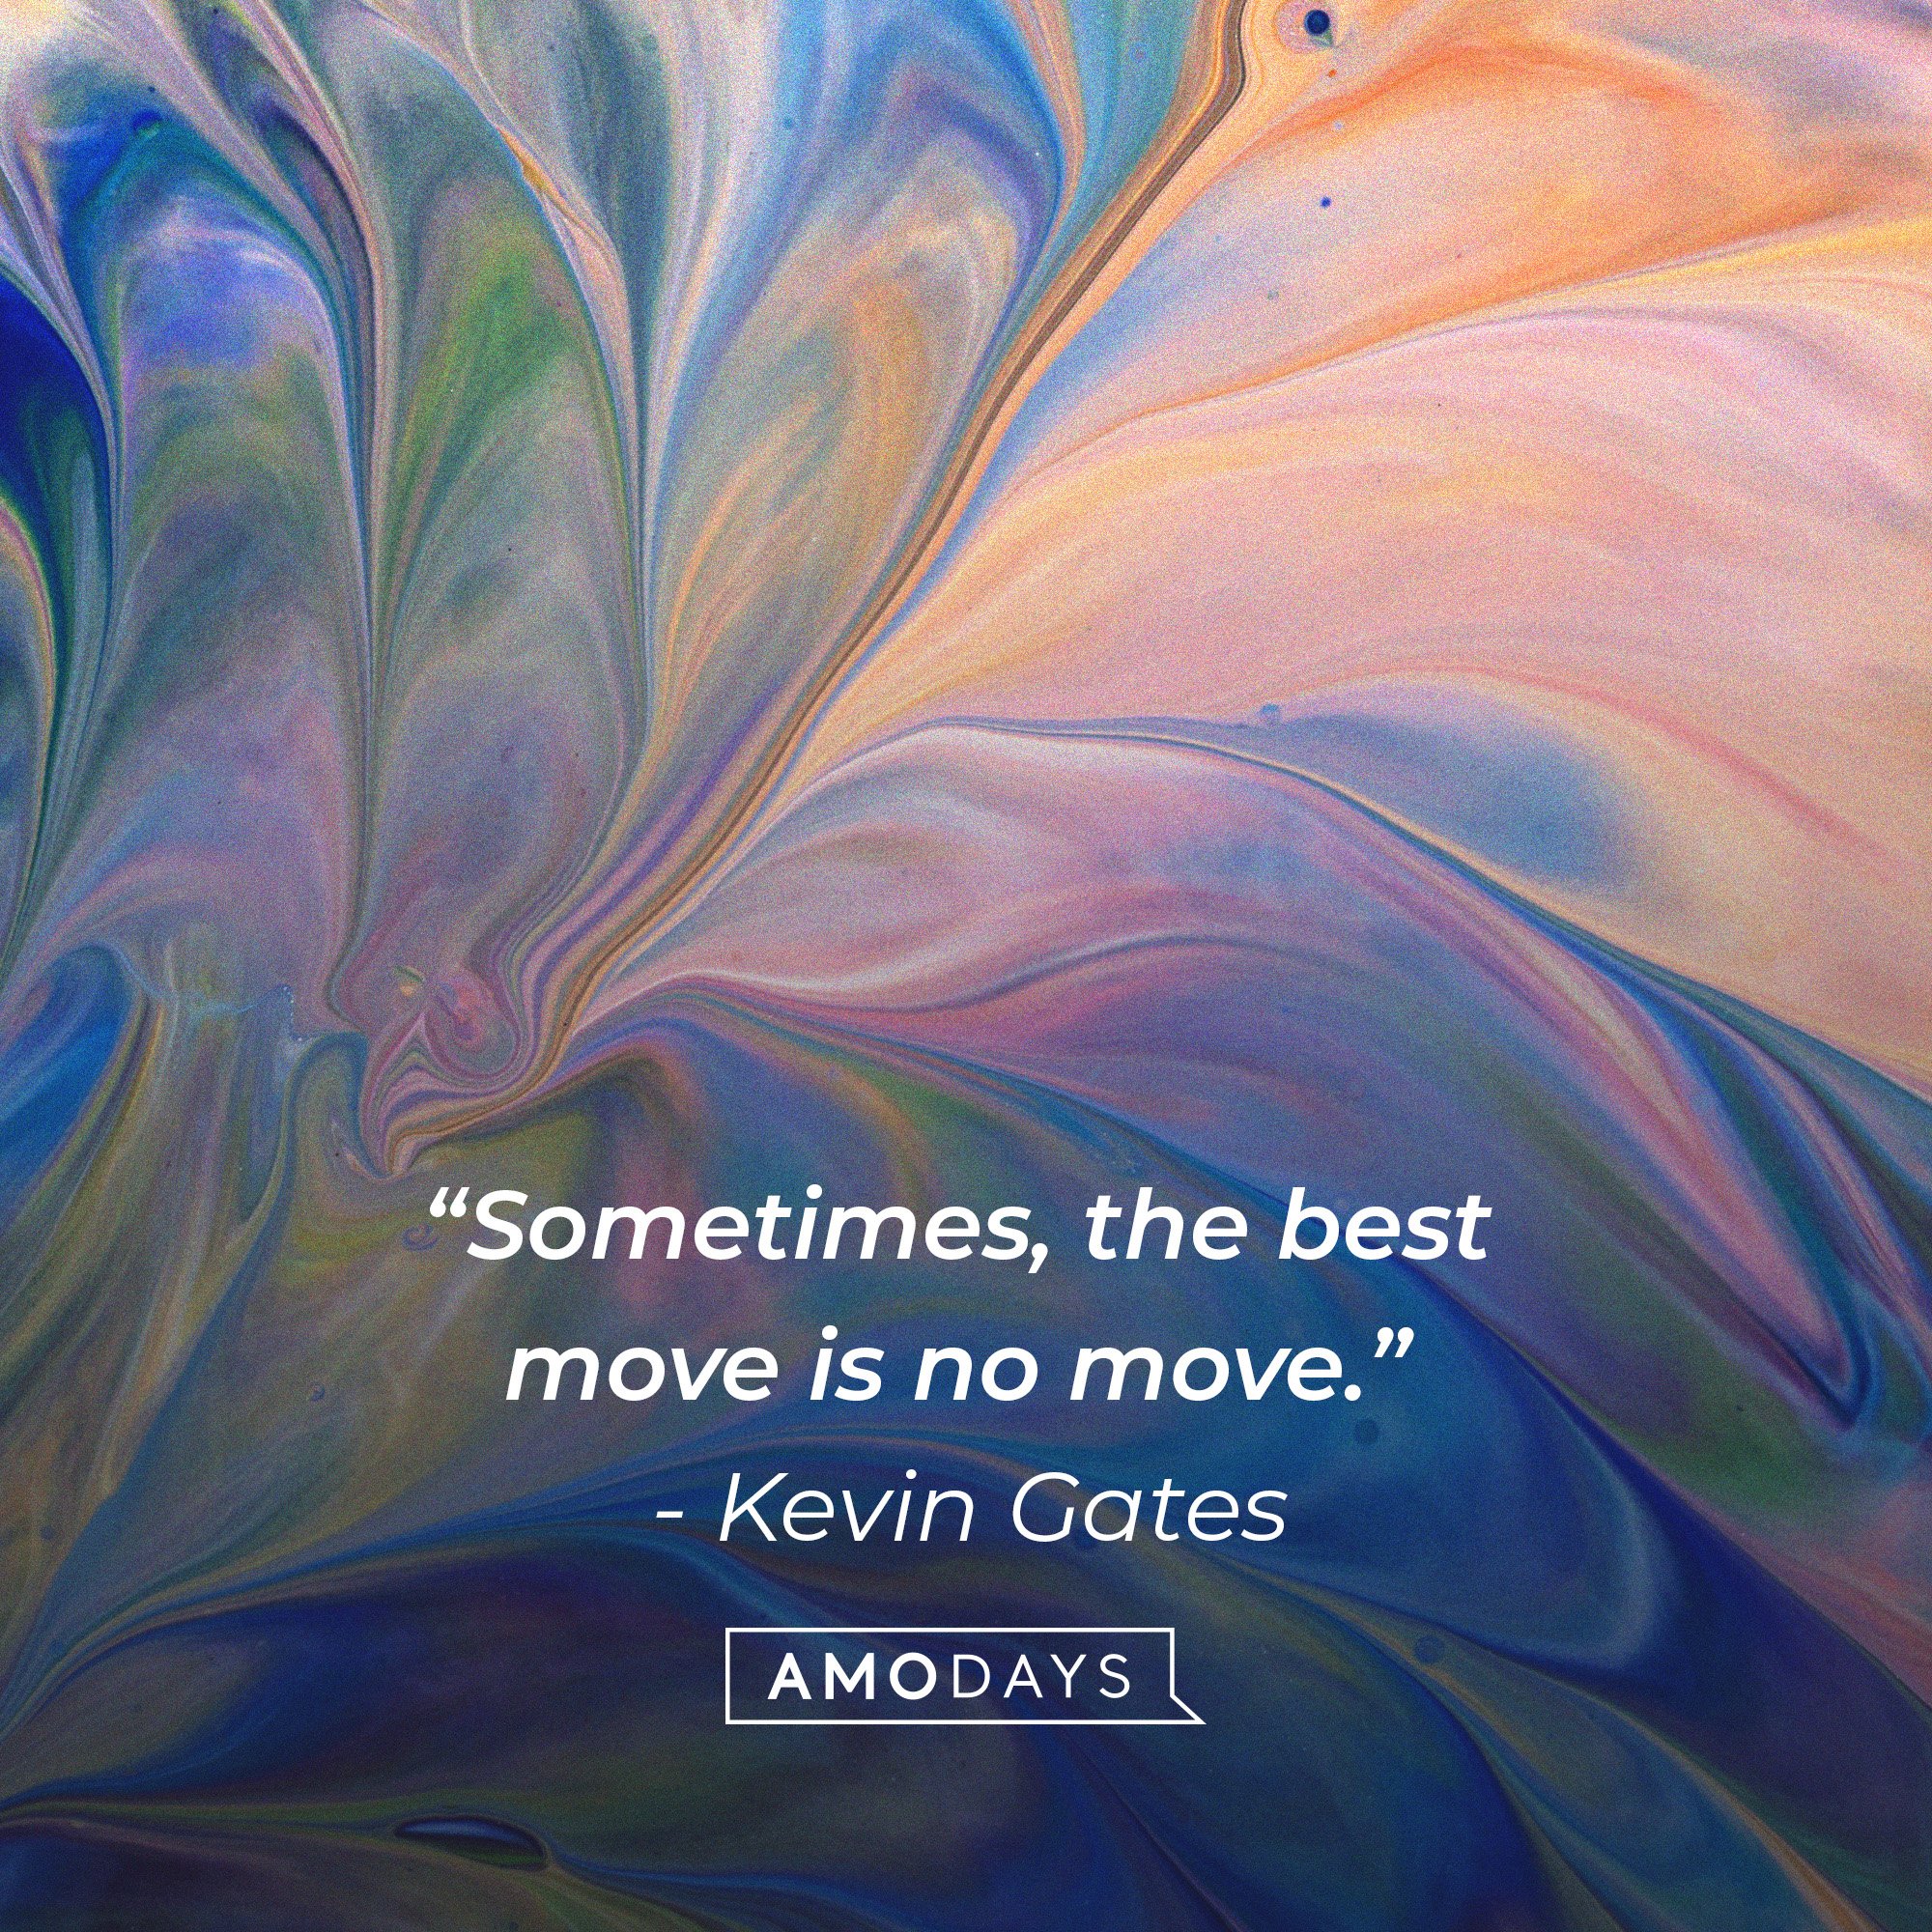 Kevin Gates’ quote: “Sometimes, the best move is no move.”|  Image: AmoDays